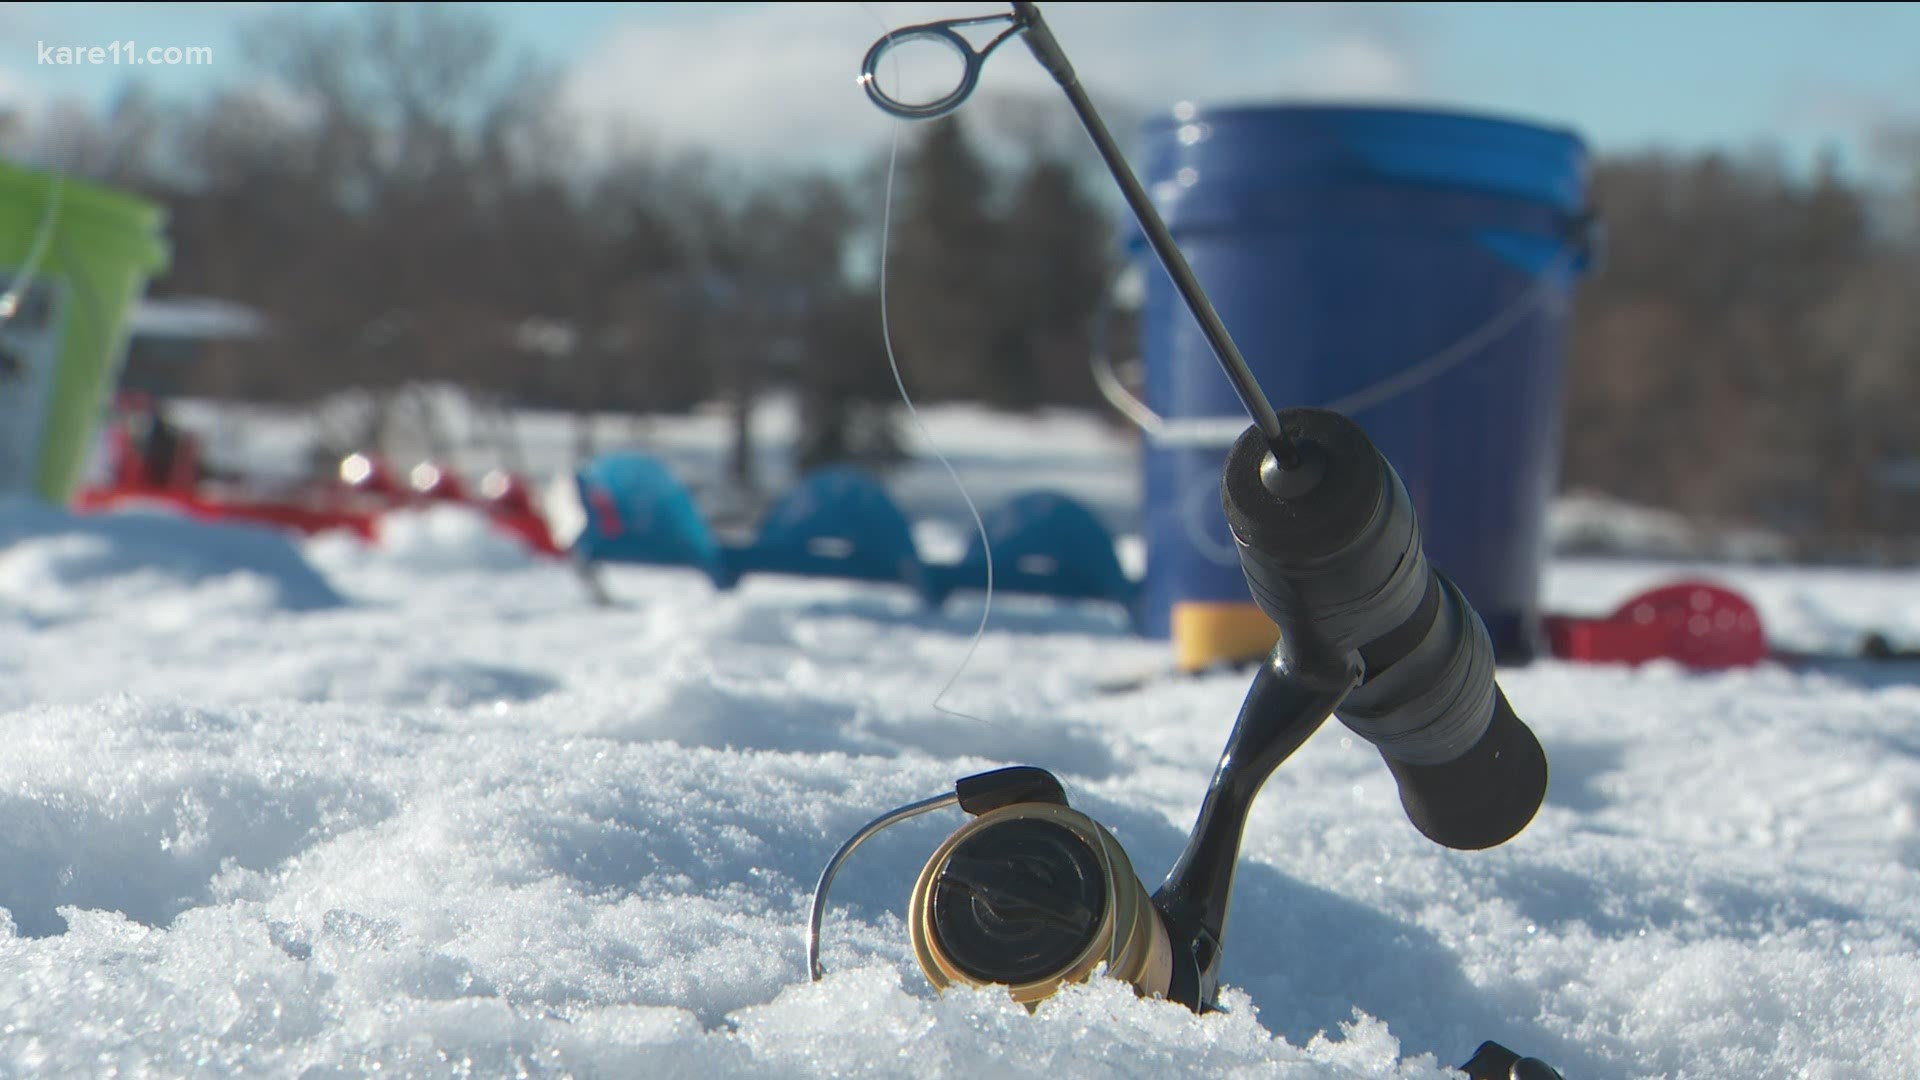 We're ice fishing on Silver Lake at Silverwood Park in New Brighton.